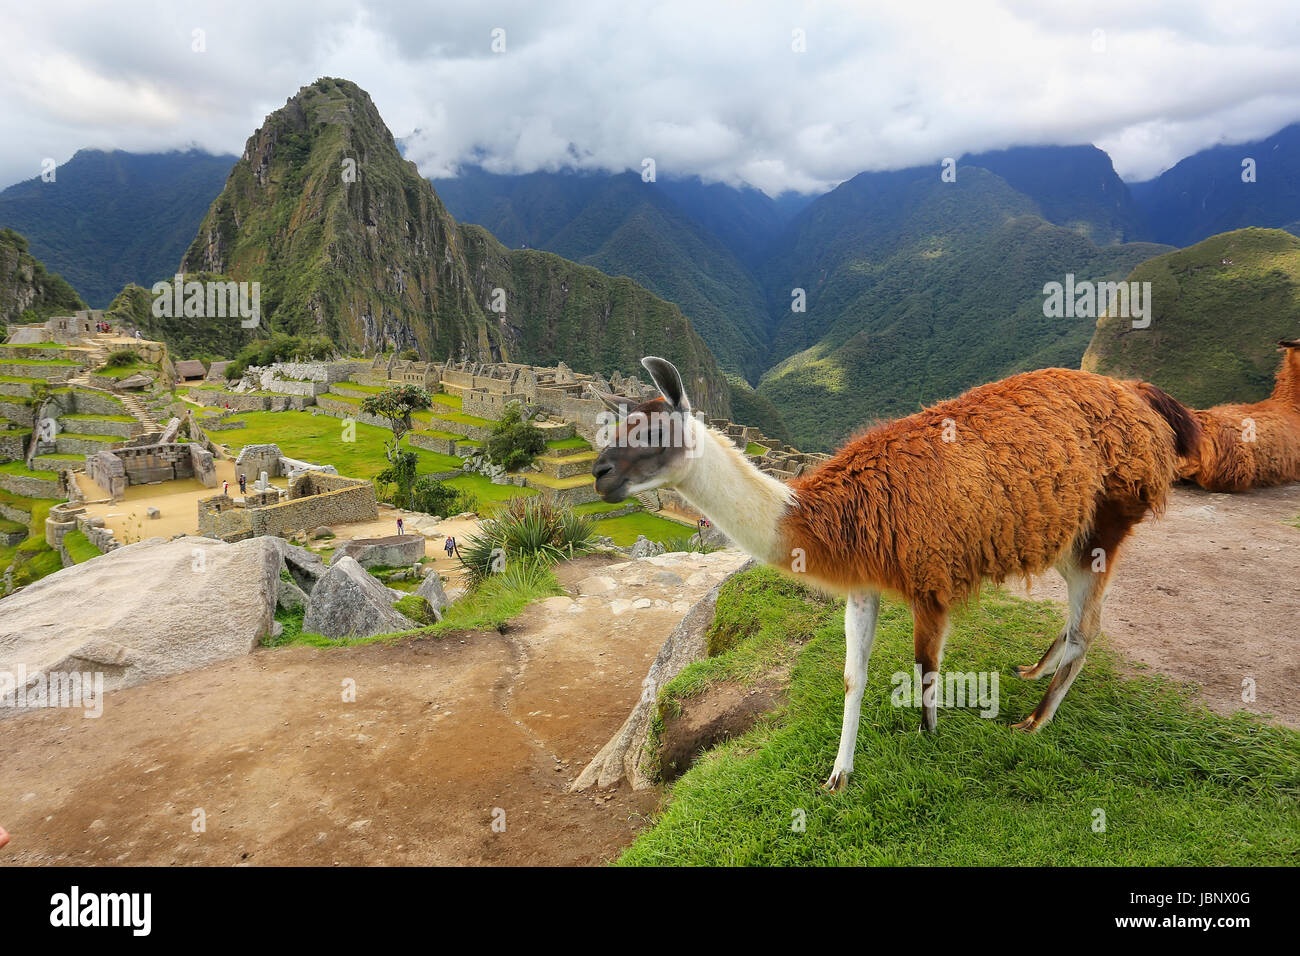 Llama standing at Machu Picchu overlook in Peru. In 2007 Machu Picchu was voted one of the New Seven Wonders of the World. Stock Photo